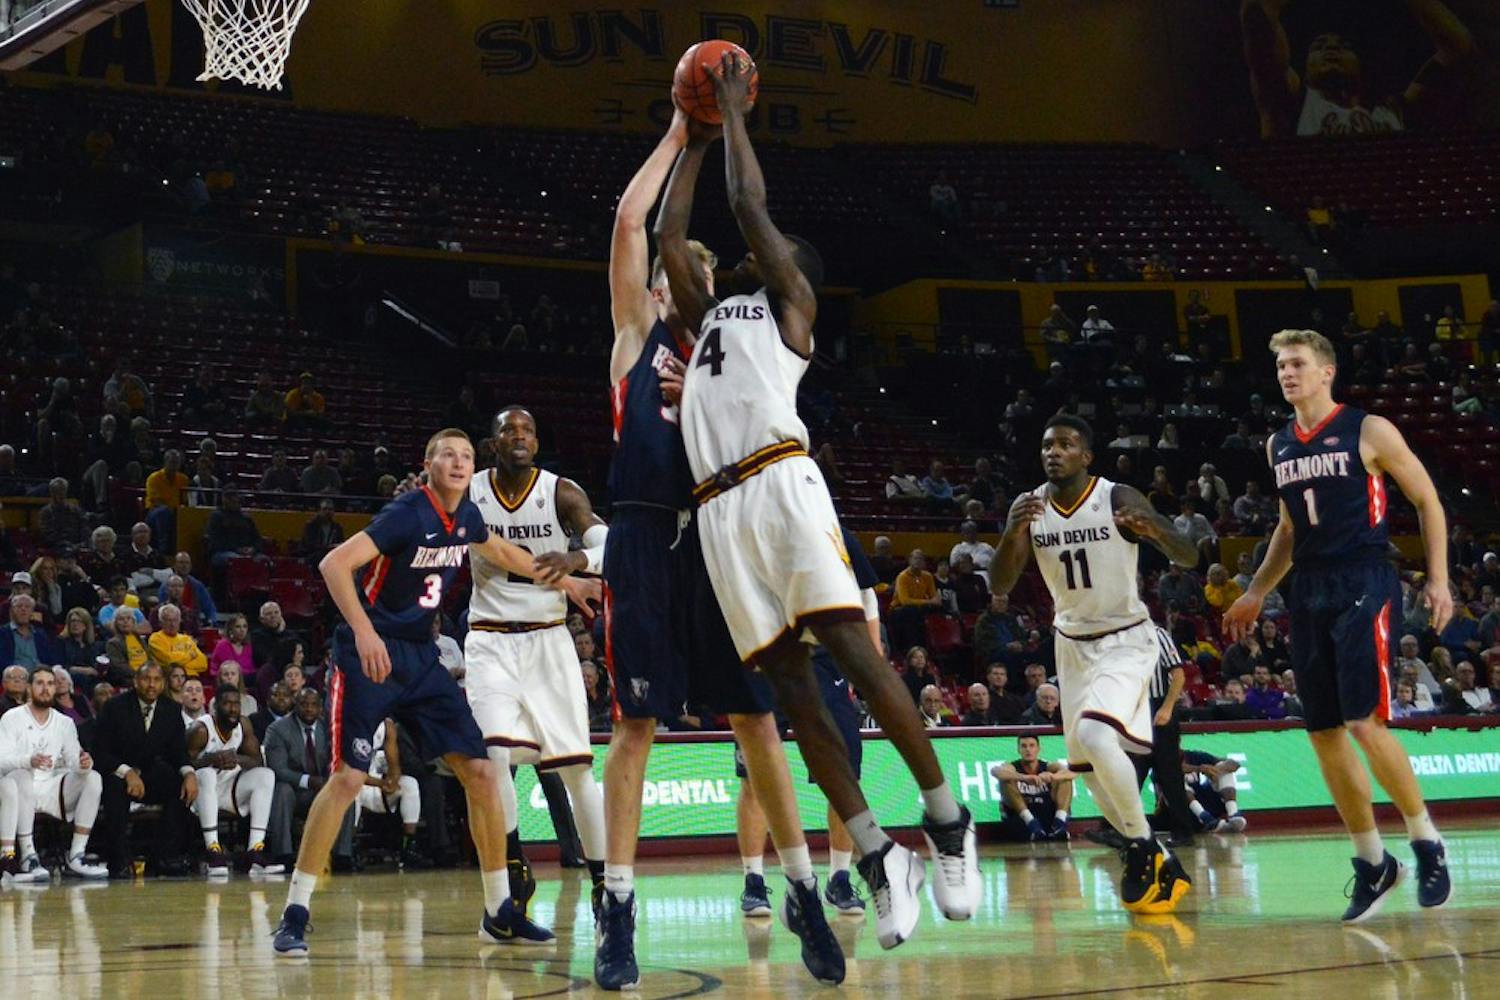 Senior guard Gerry Blakes drives to the basket against Belmont on Monday, Nov. 16, 2015, at Wells Fargo Arena in Tempe. The Sun Devils defeated the Bruins 83-74.